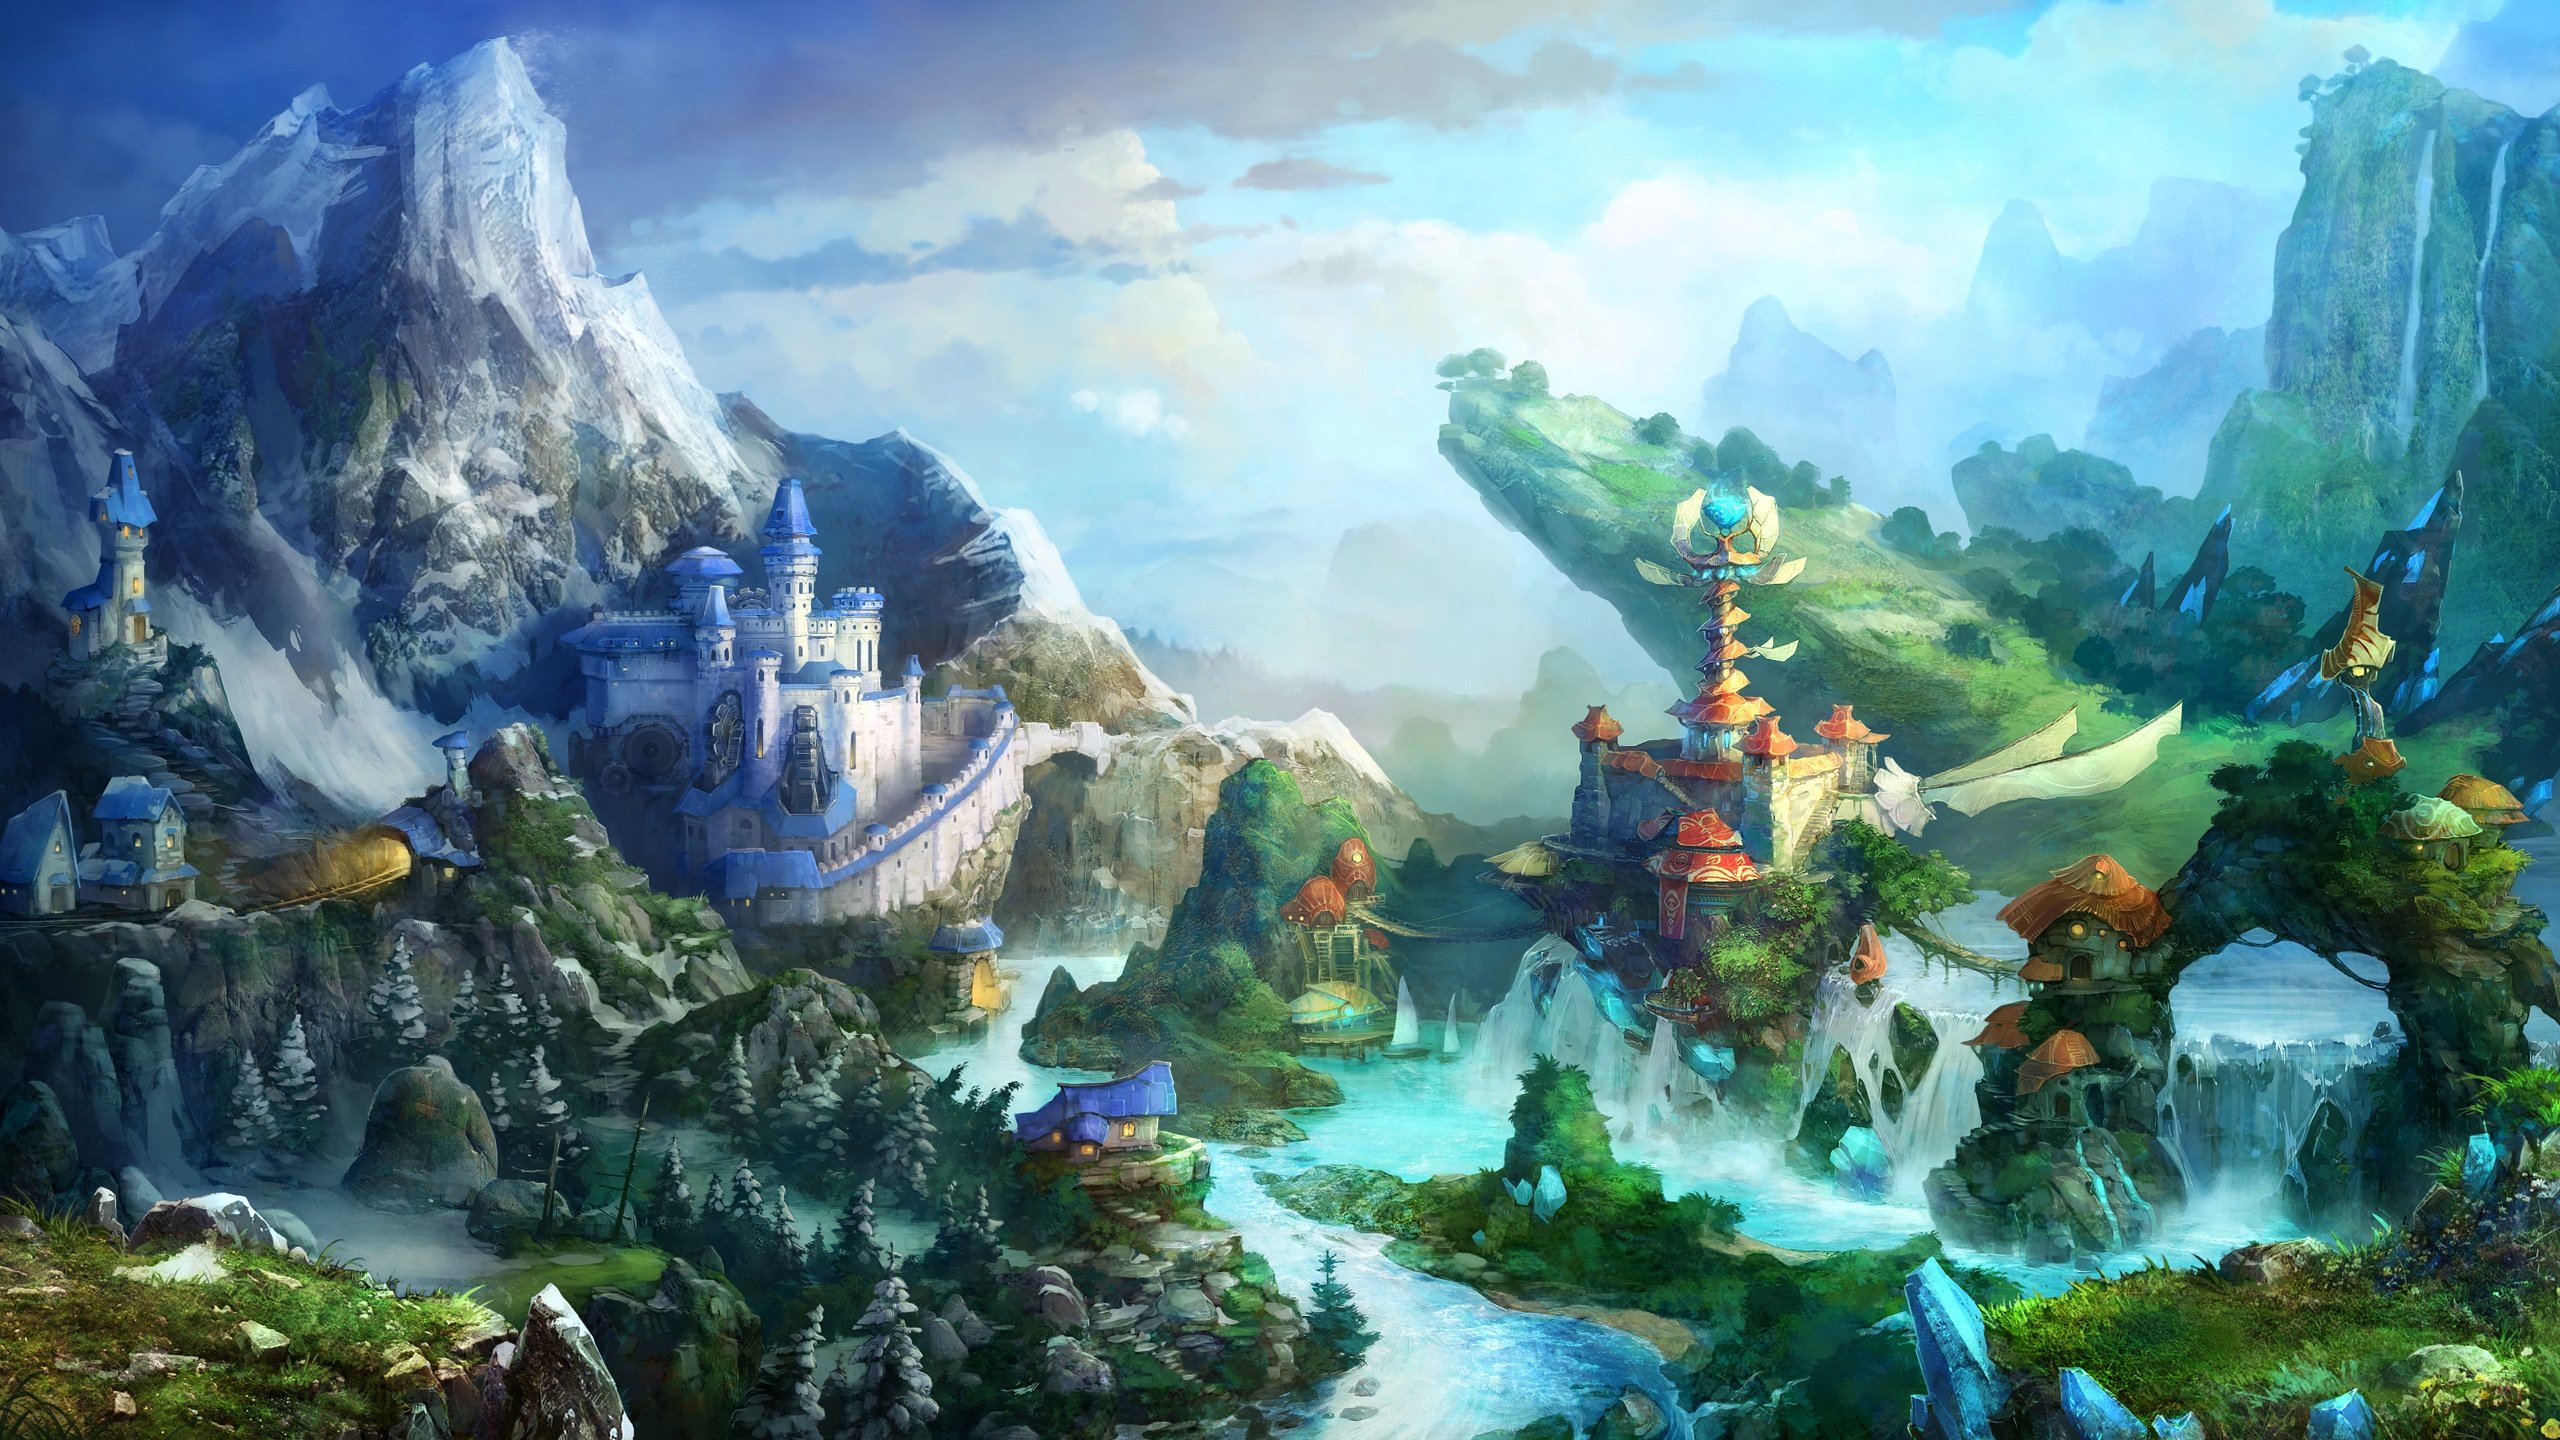 rpg wallpaper,action adventure game,natural landscape,nature,strategy video game,painting